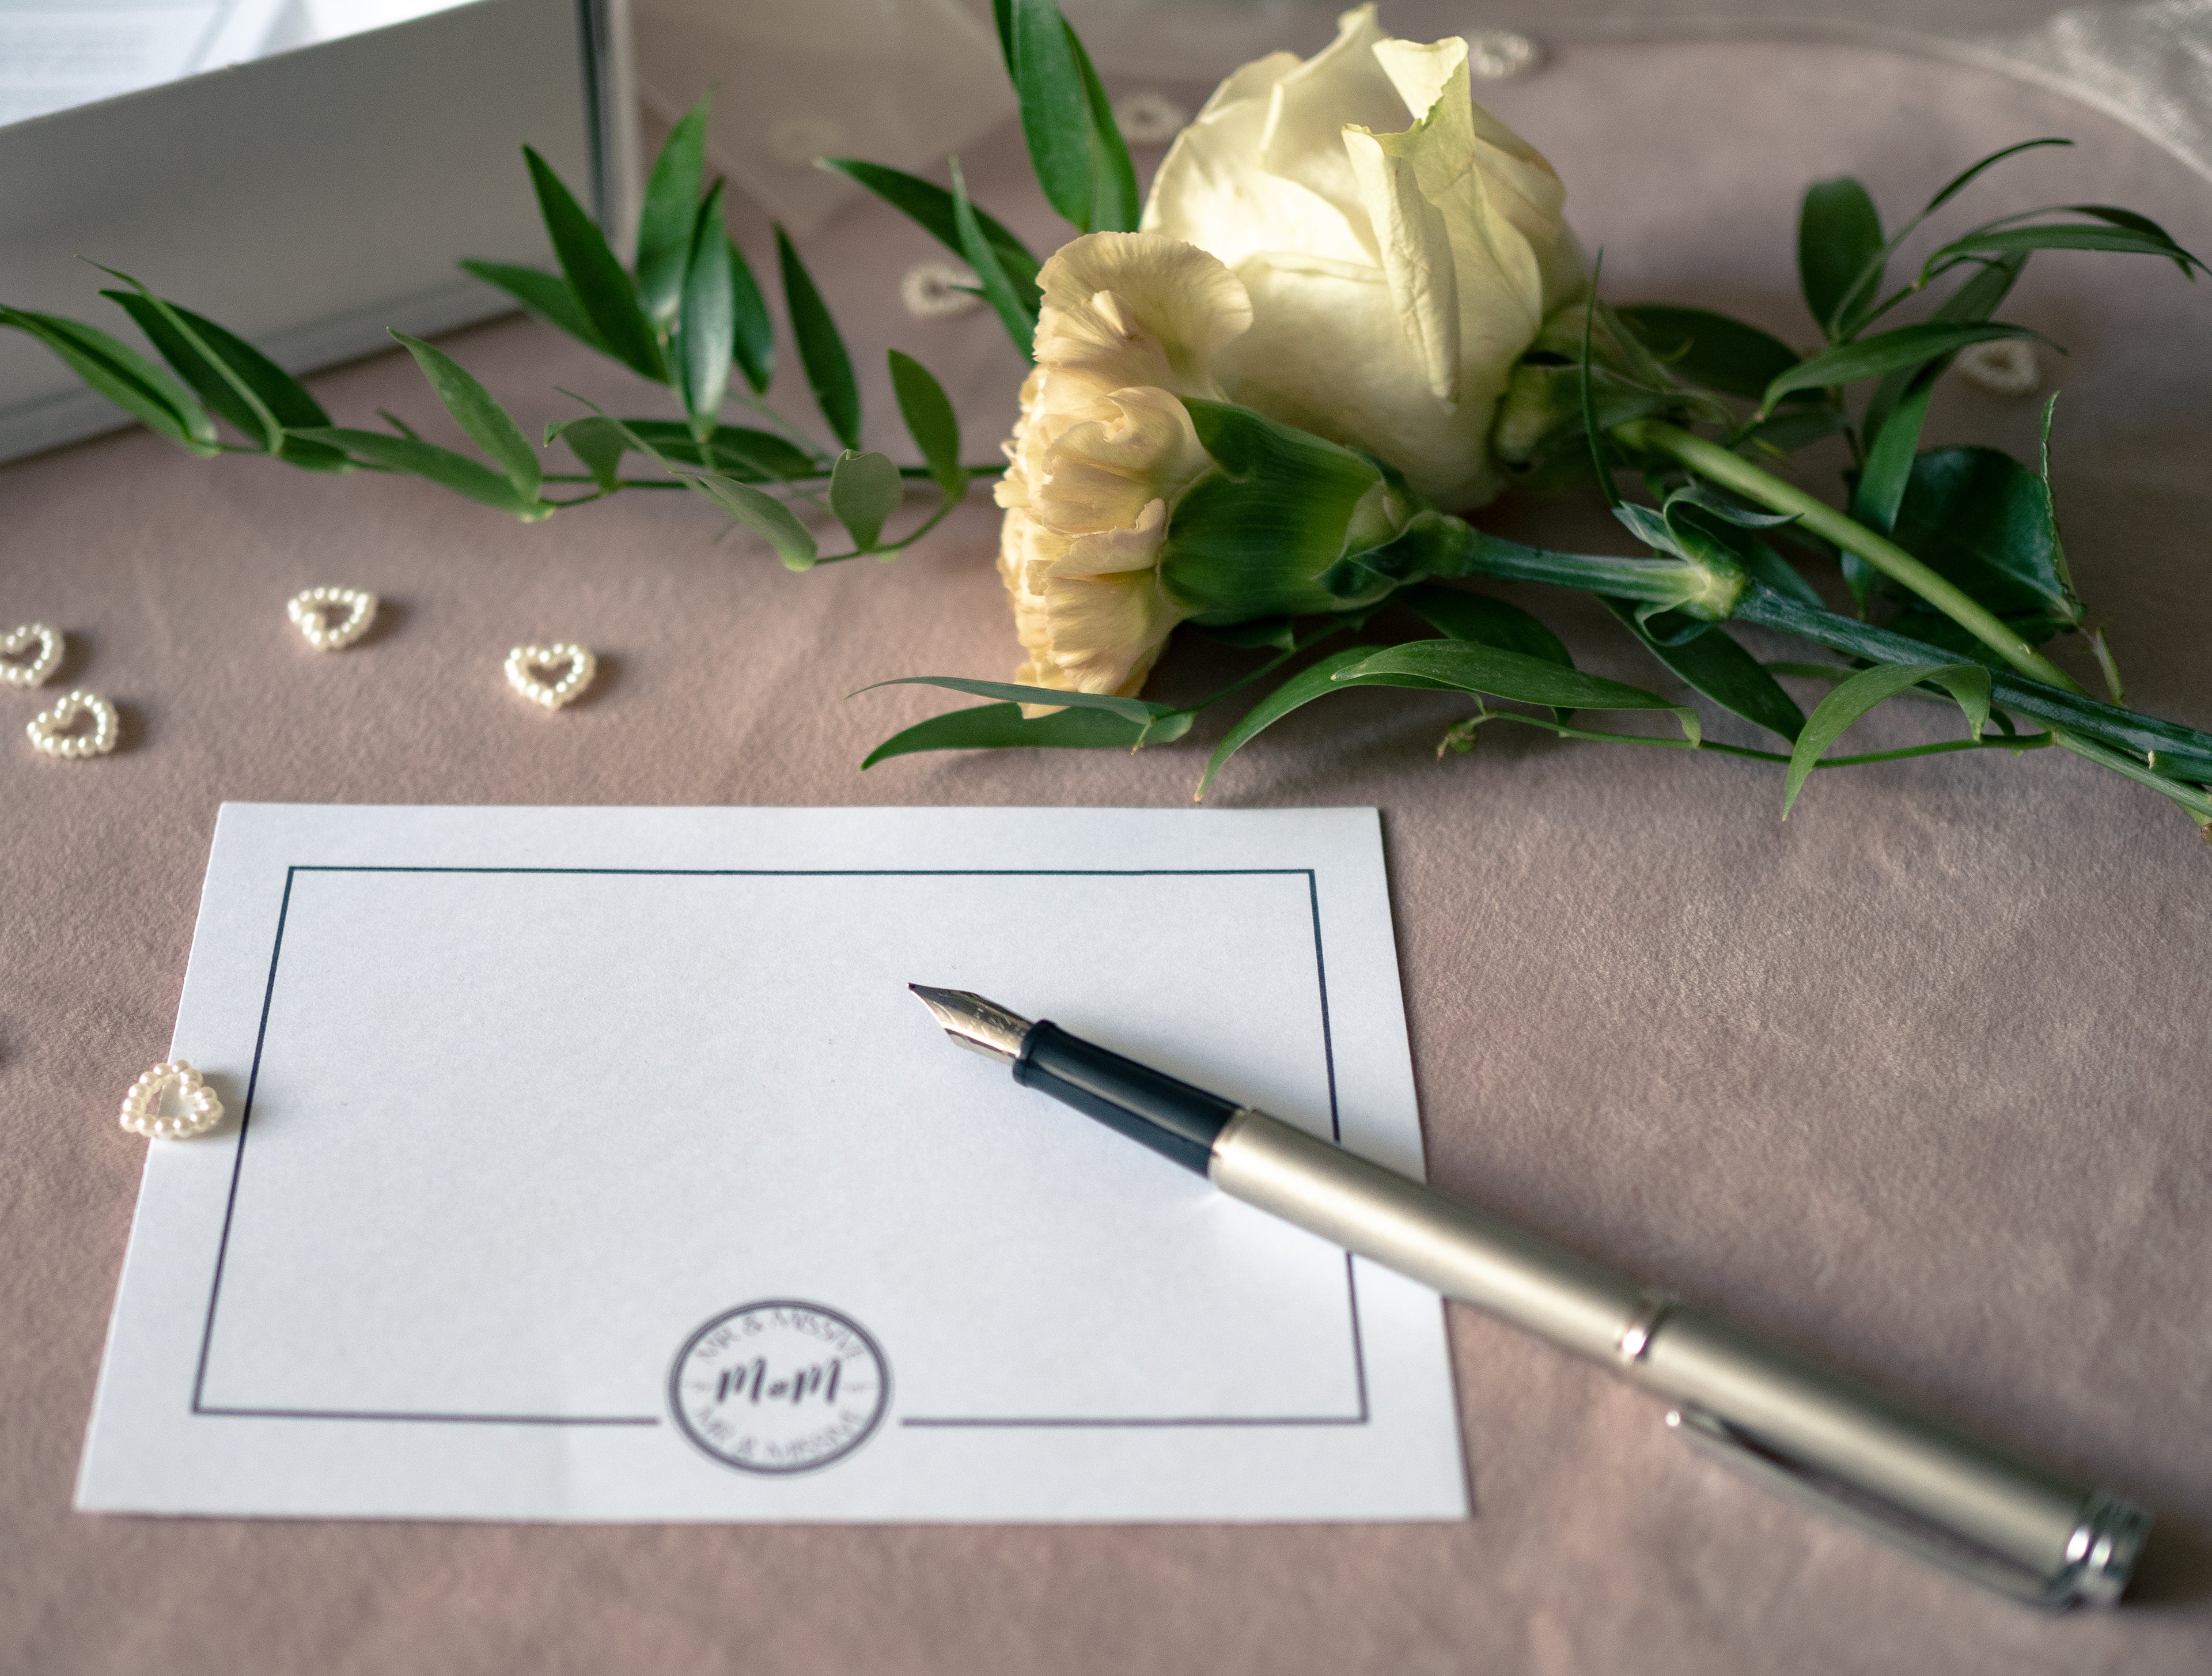 Photograph of a Mr & Missive luxury postcard with a fountain pen, shown with flowers in the background.